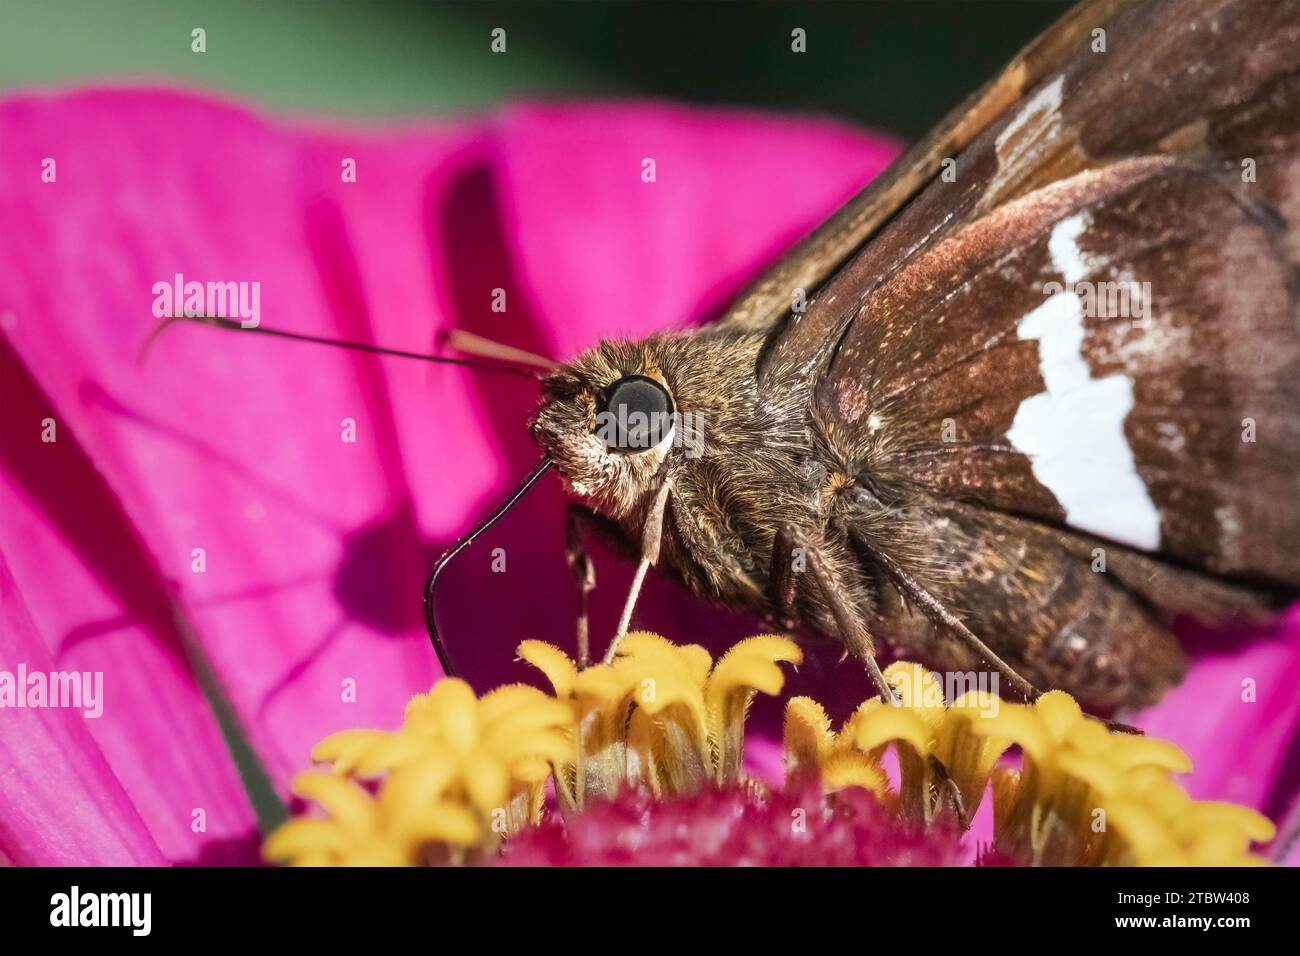 Extreme close up of a Silver Spotted Skipper Butterfly (Epargyreus clarus) using its proboscis tongue to retrieve nectar from a pink zinnia flower Stock Photo